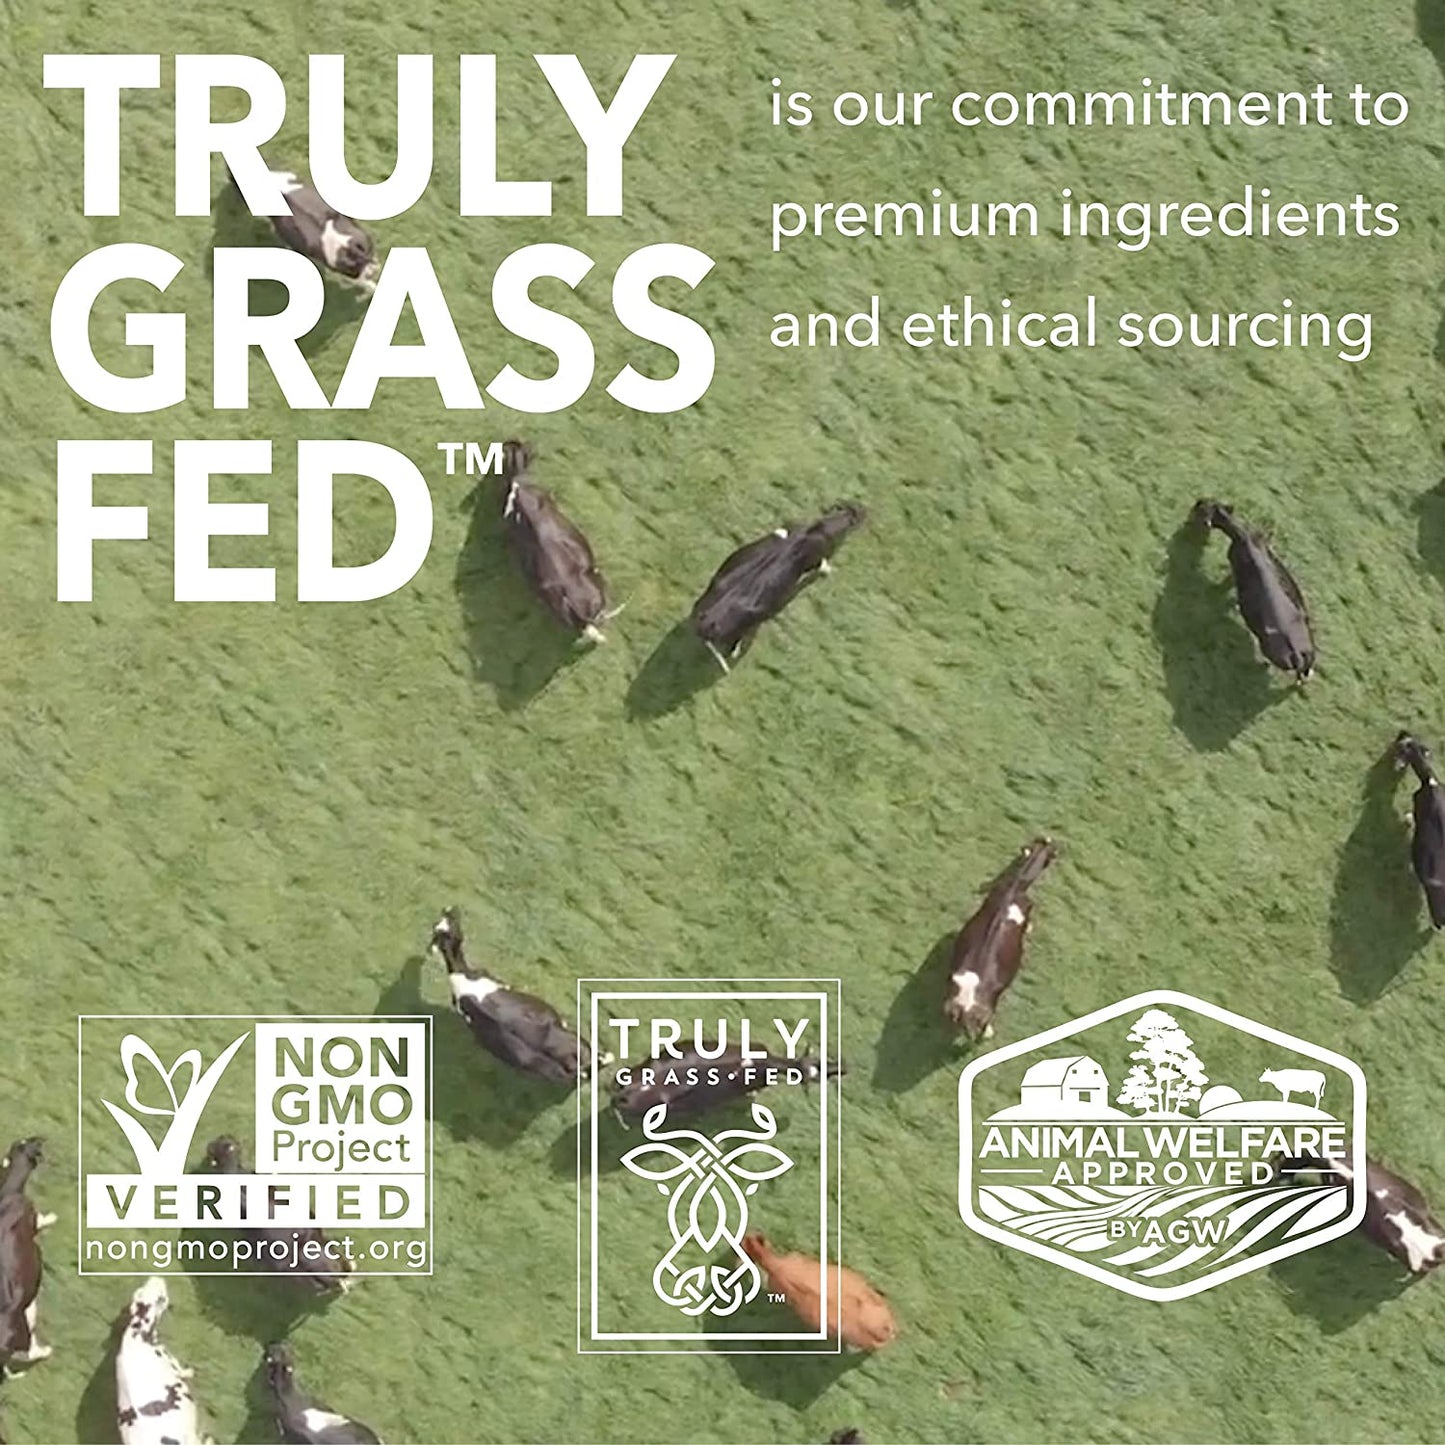 ICONIC Protein is Truly Grass Fed Verified - this means it is Non-GMO Project Verified, Truly Grass Fed Verified, and Animal Welfare Approve by A Greener World.